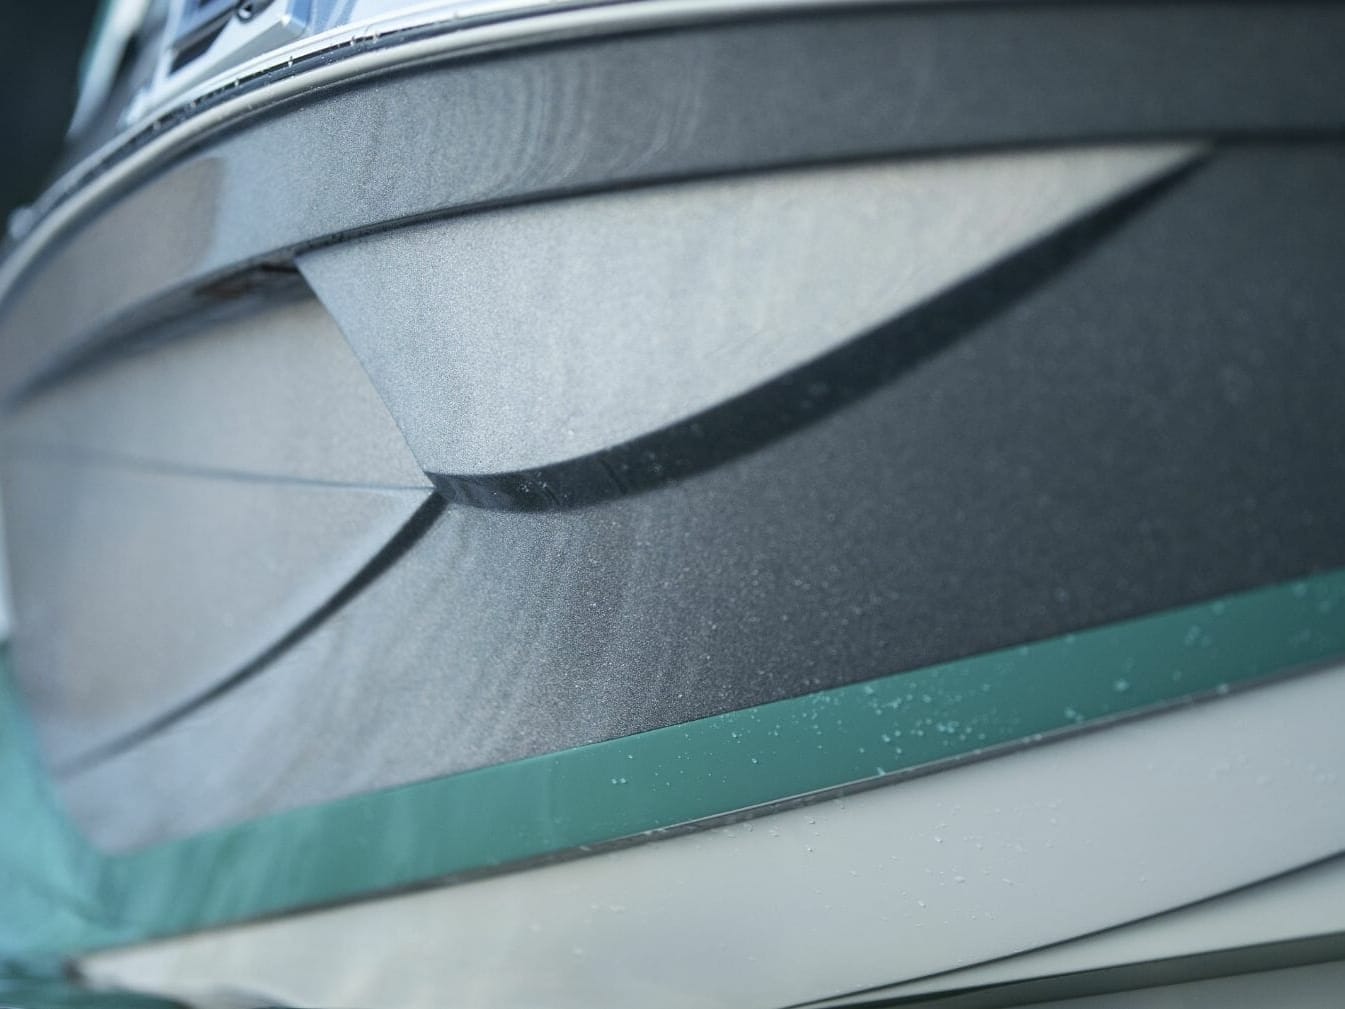 A close up of the front of a wakesurf boat.